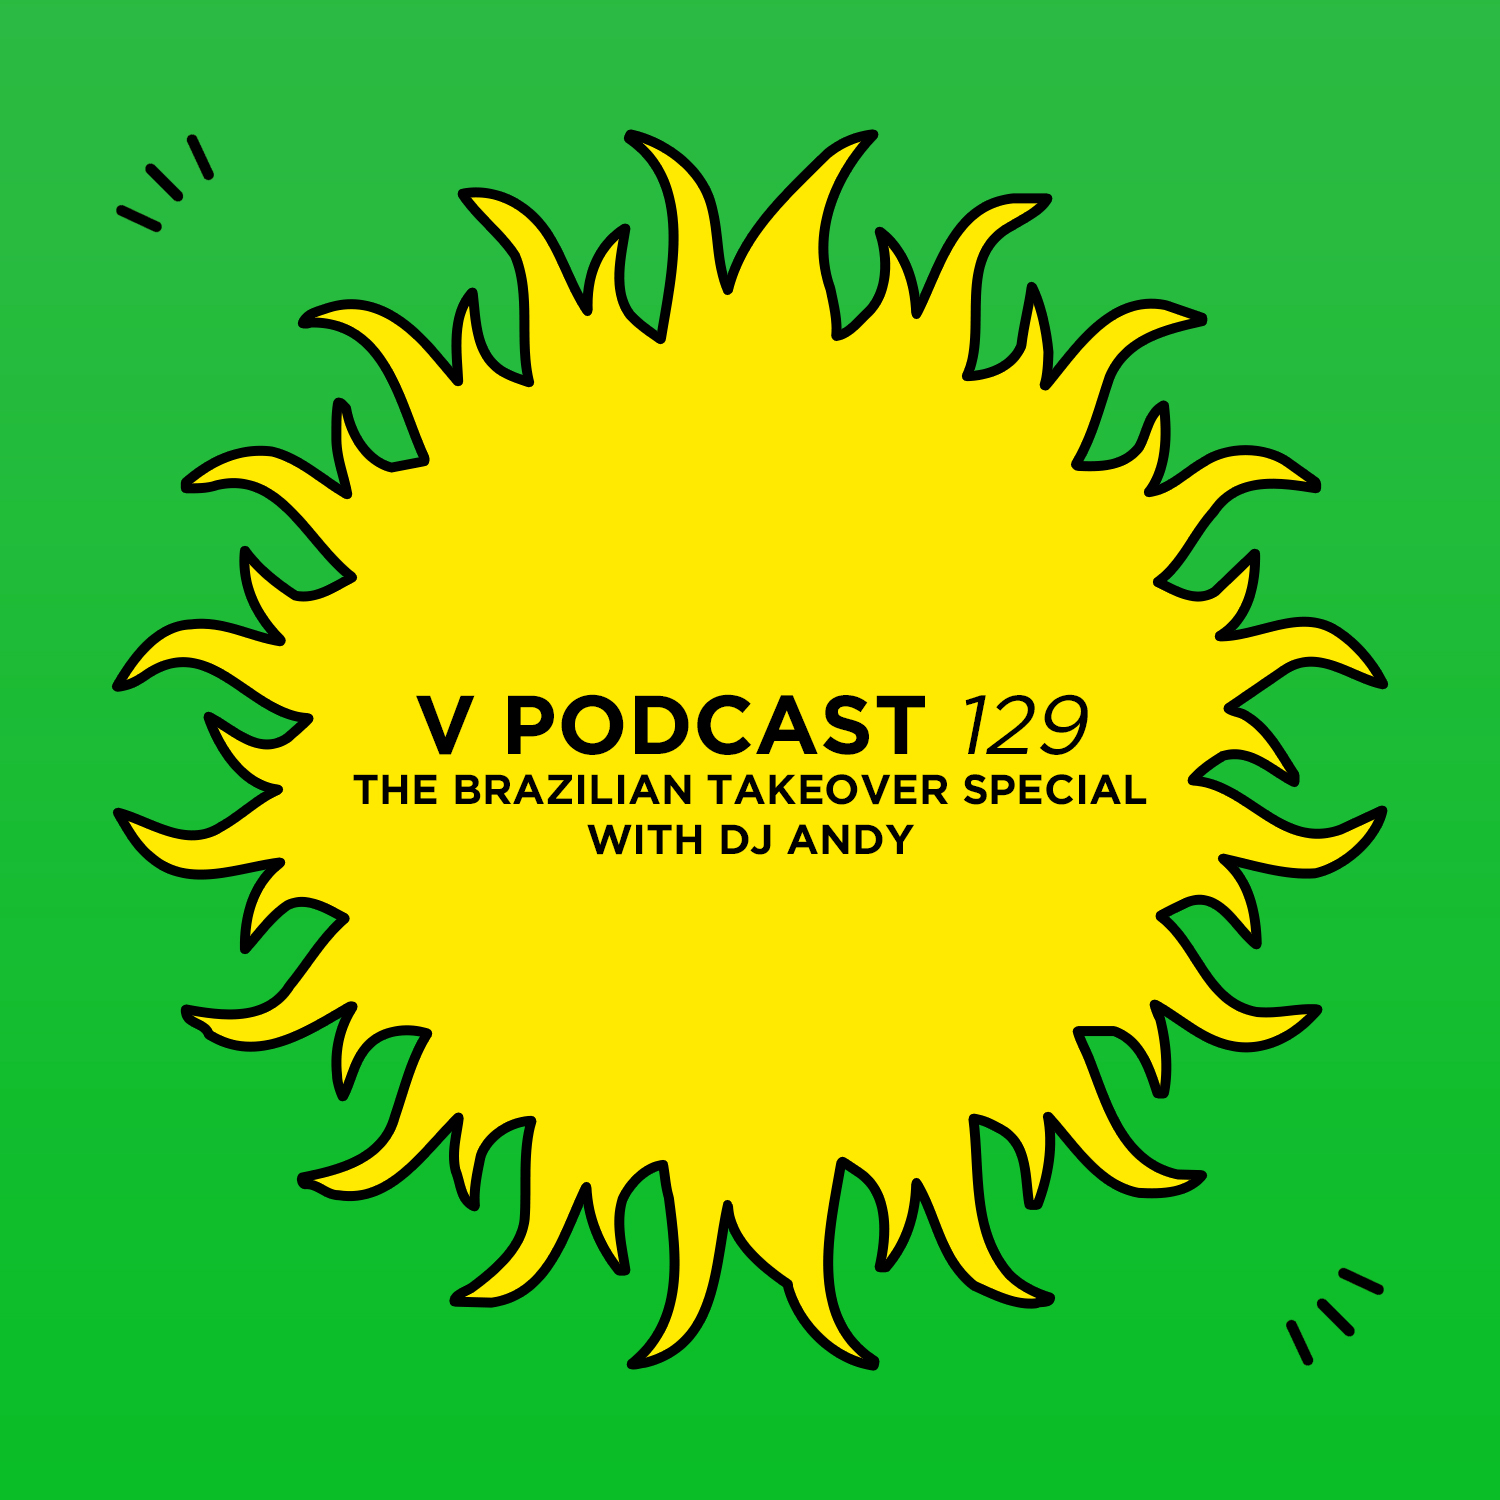 V Podcast 129 - The Brazilian Takeover Special with DJ Andy Artwork